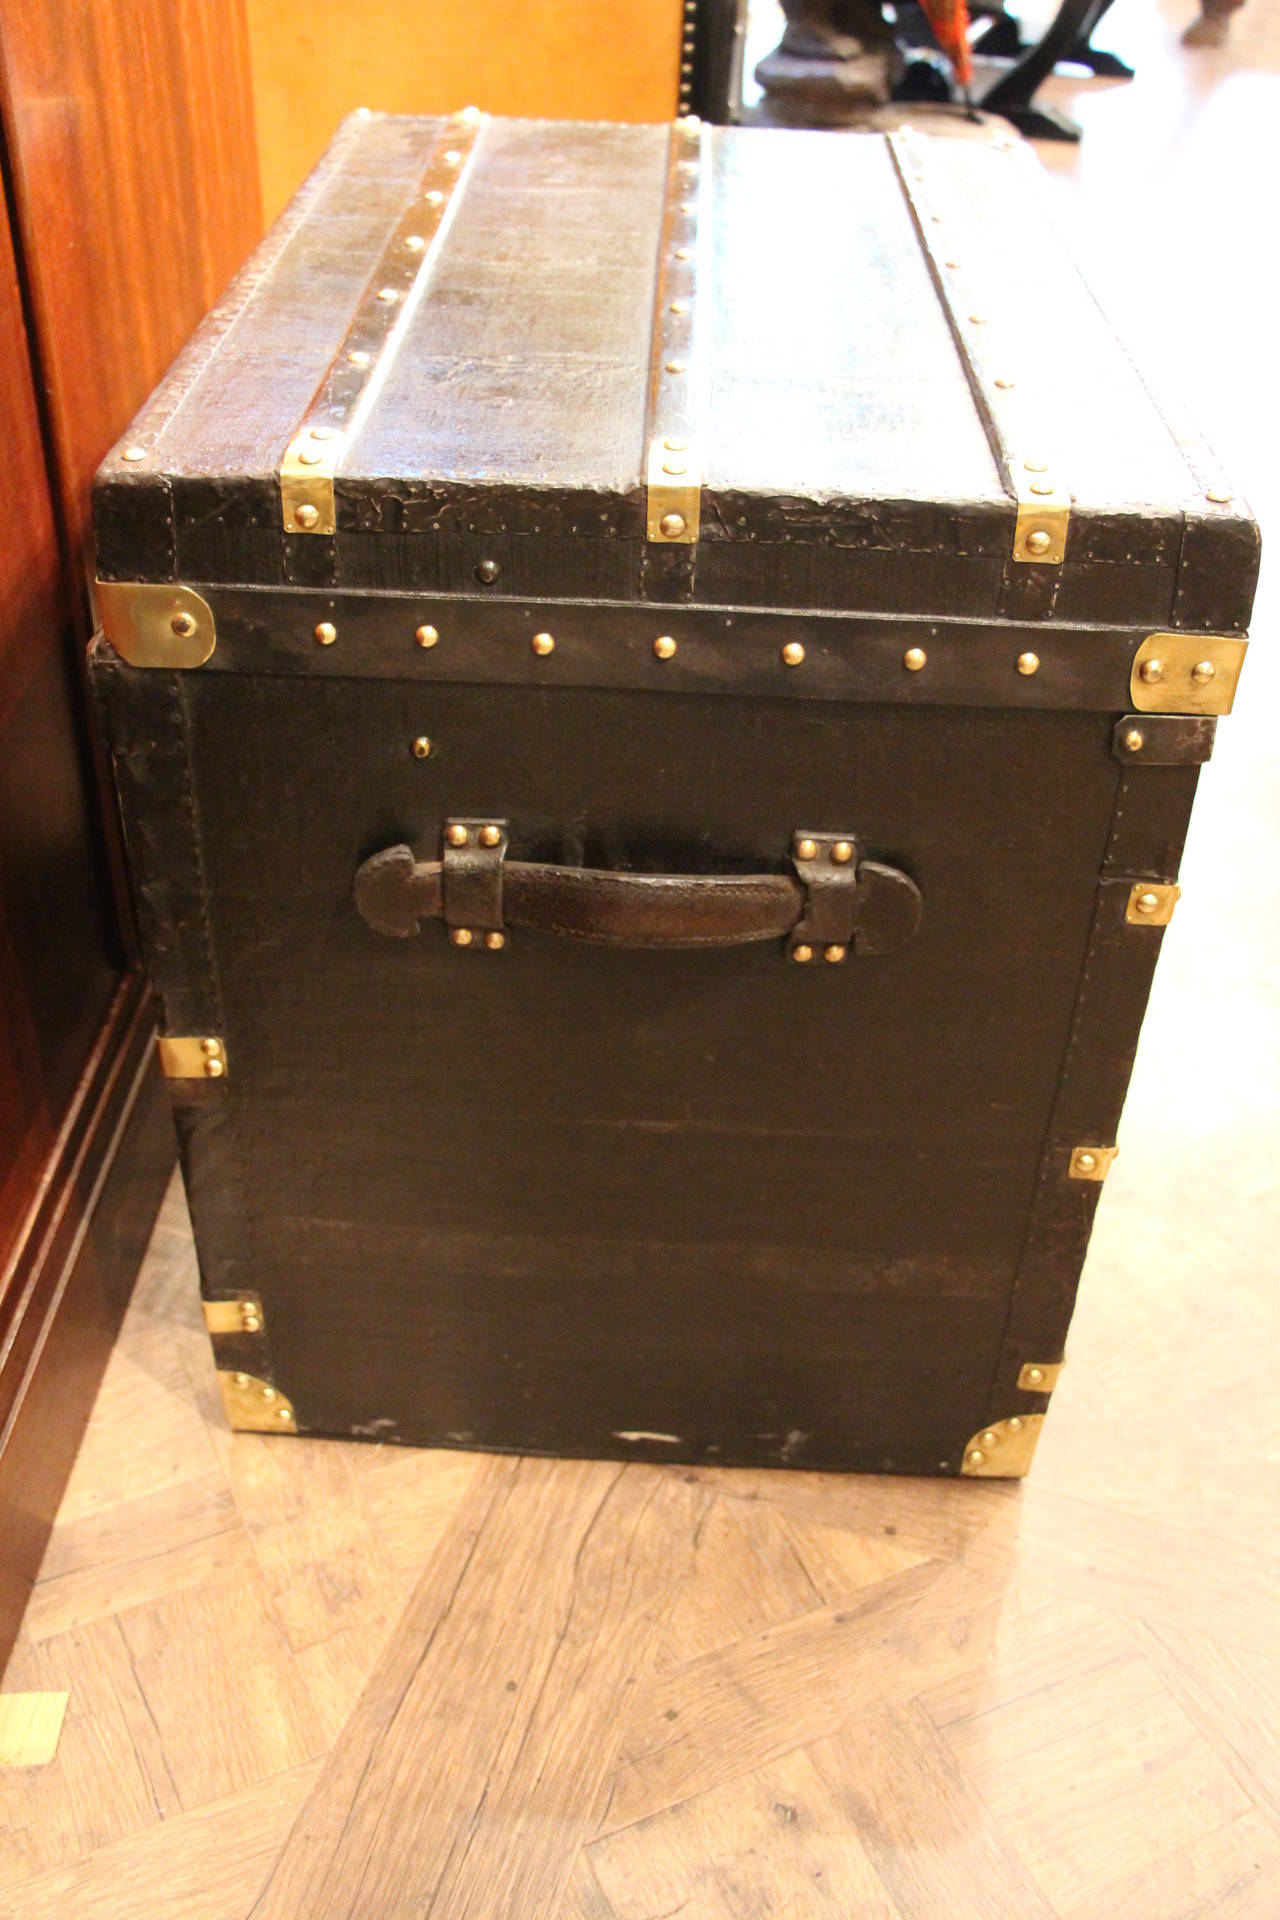 This steamer trunk has got very elegant proportions and could be used as end of a sofa or bedside cabinet. It features steel trim, black canvas, brass fittings and lock and leather handles.
Its interior has been relined around 10 years ago and is